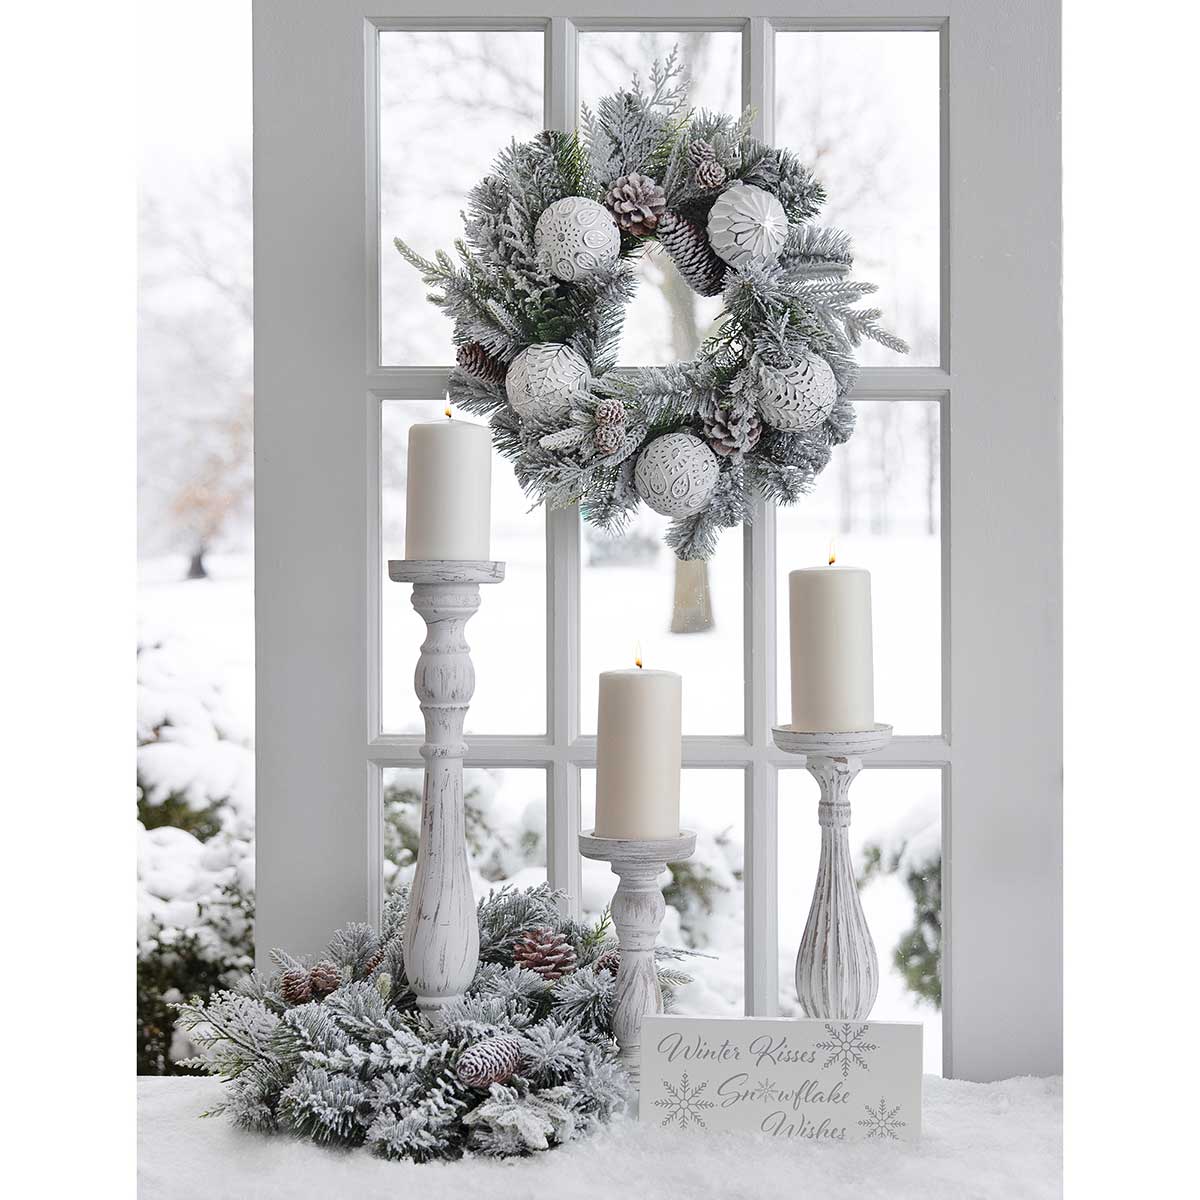 SNOW FIR PINE MINI WREATH WITH PINECONES 17" (INNER RING 6") - Click Image to Close